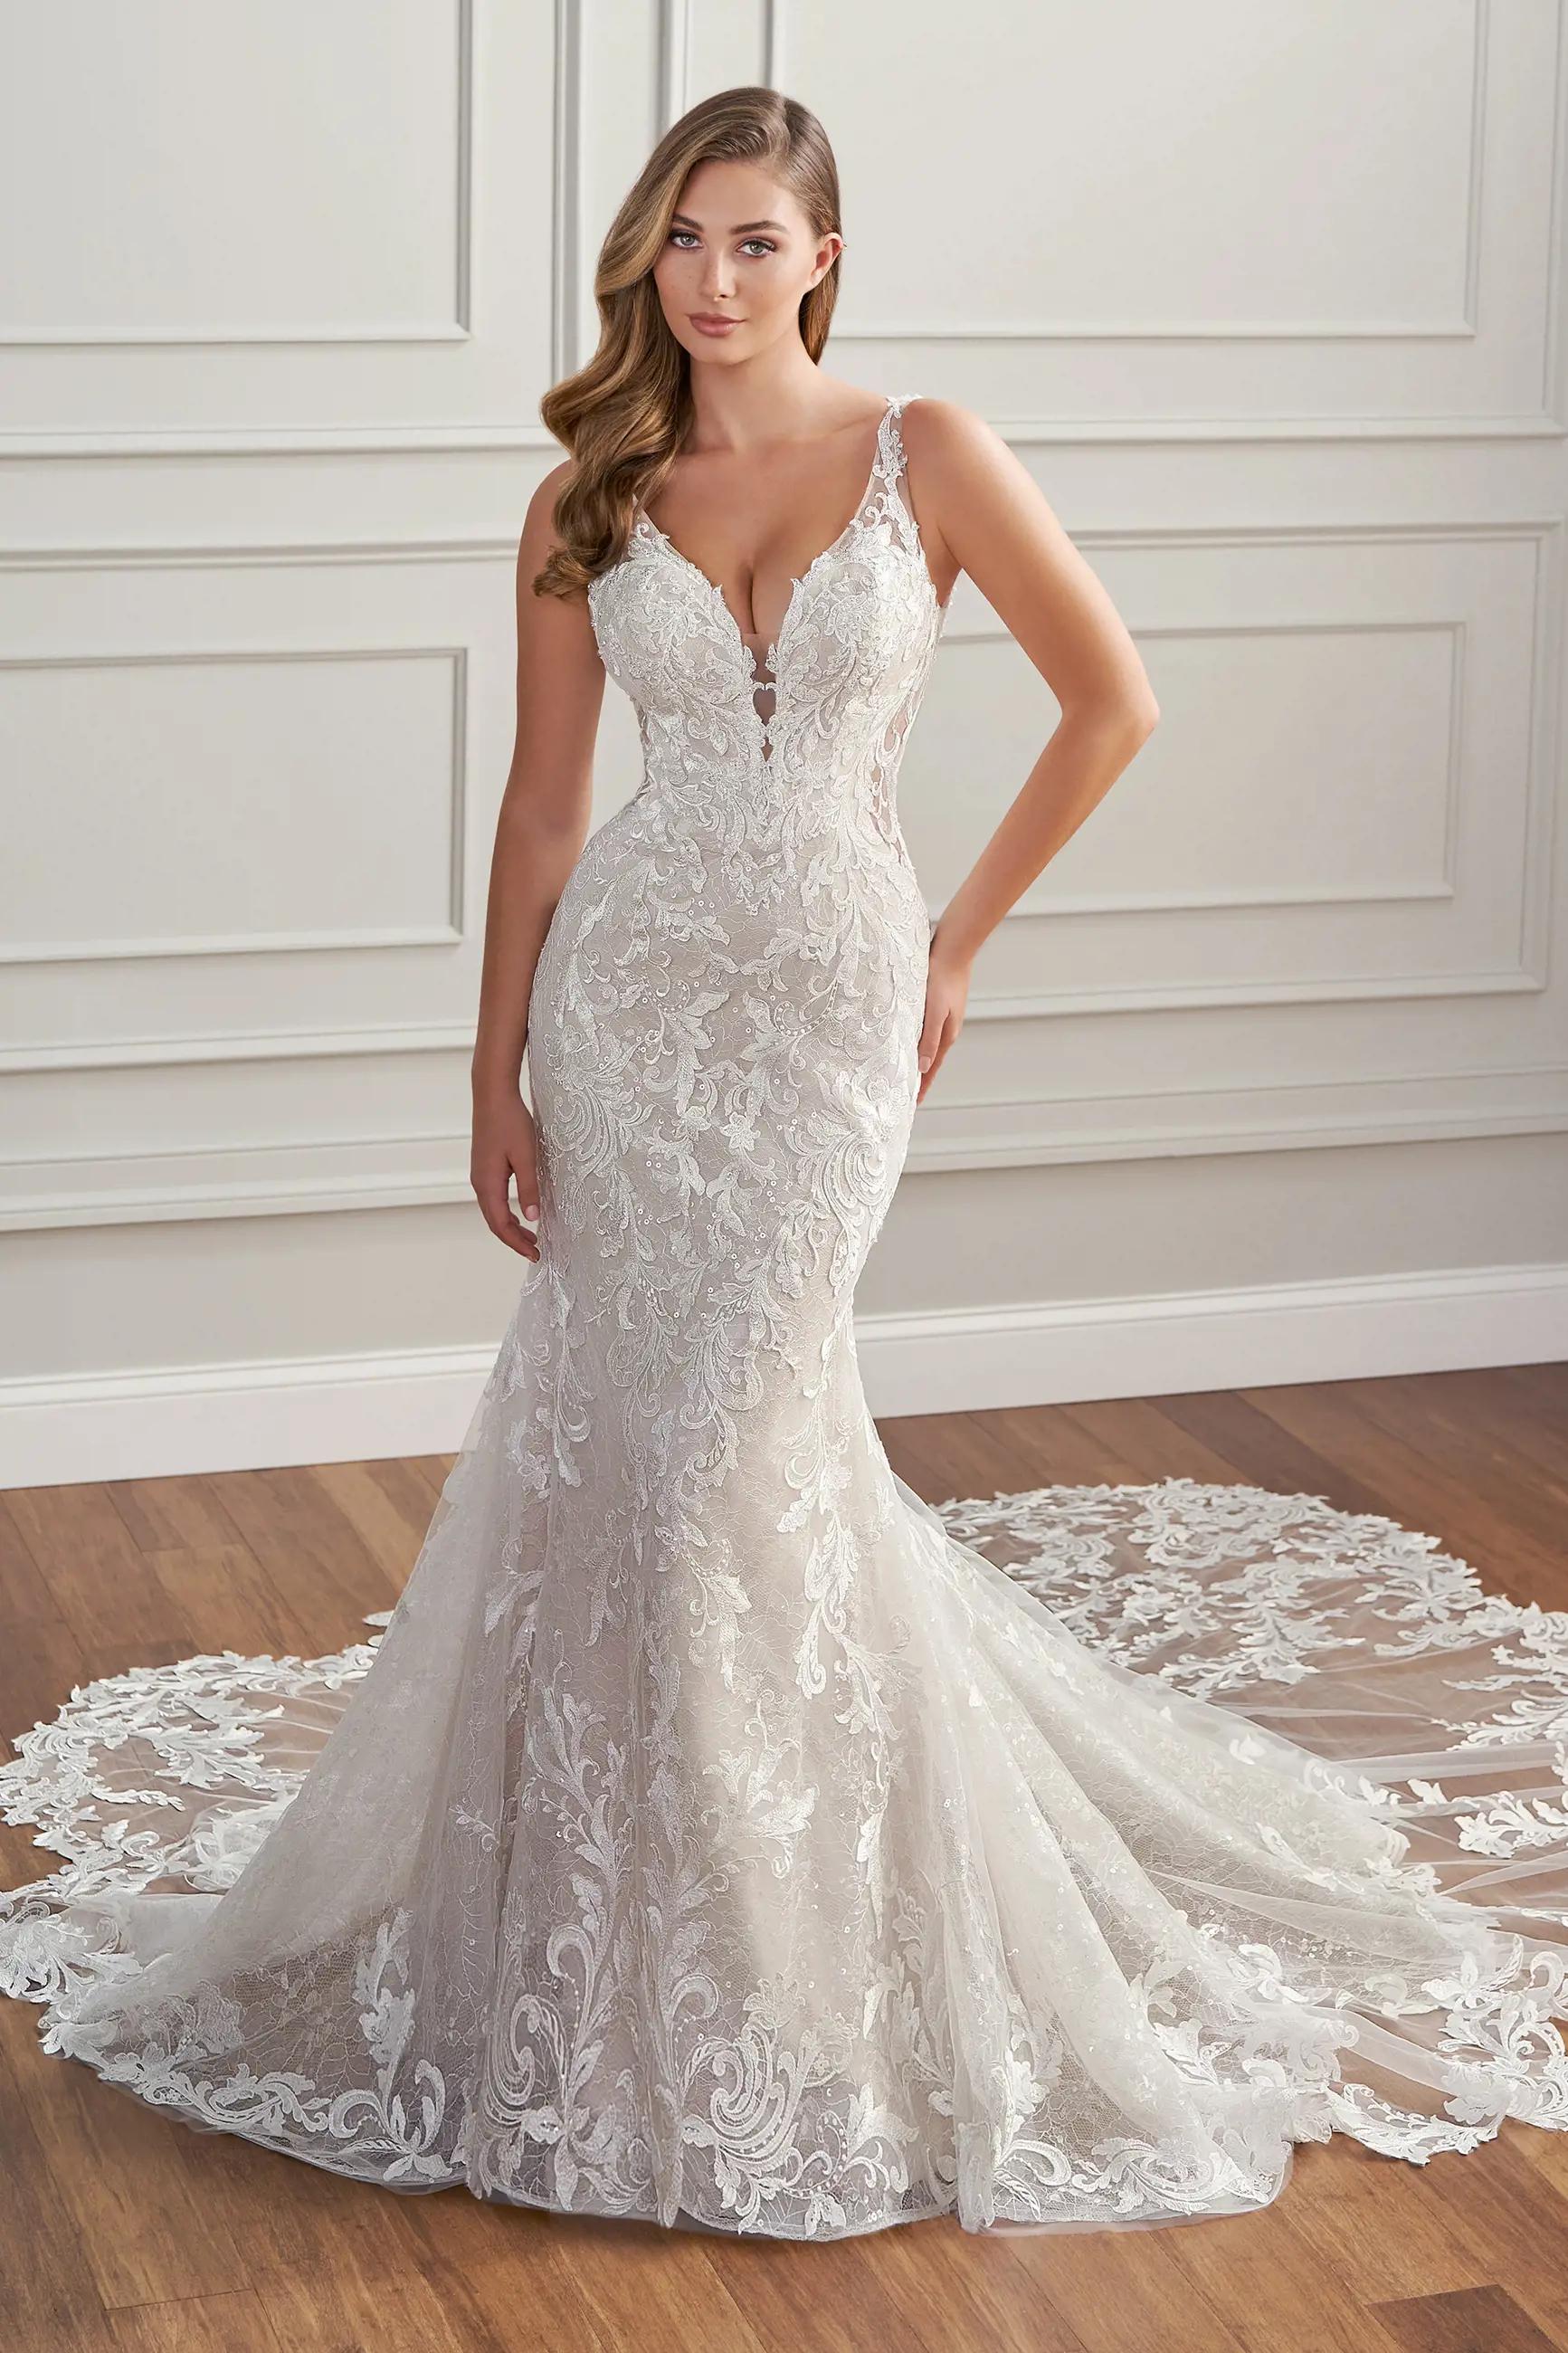 Schiffli Lace Fit and Flare Wedding Dress | Everly